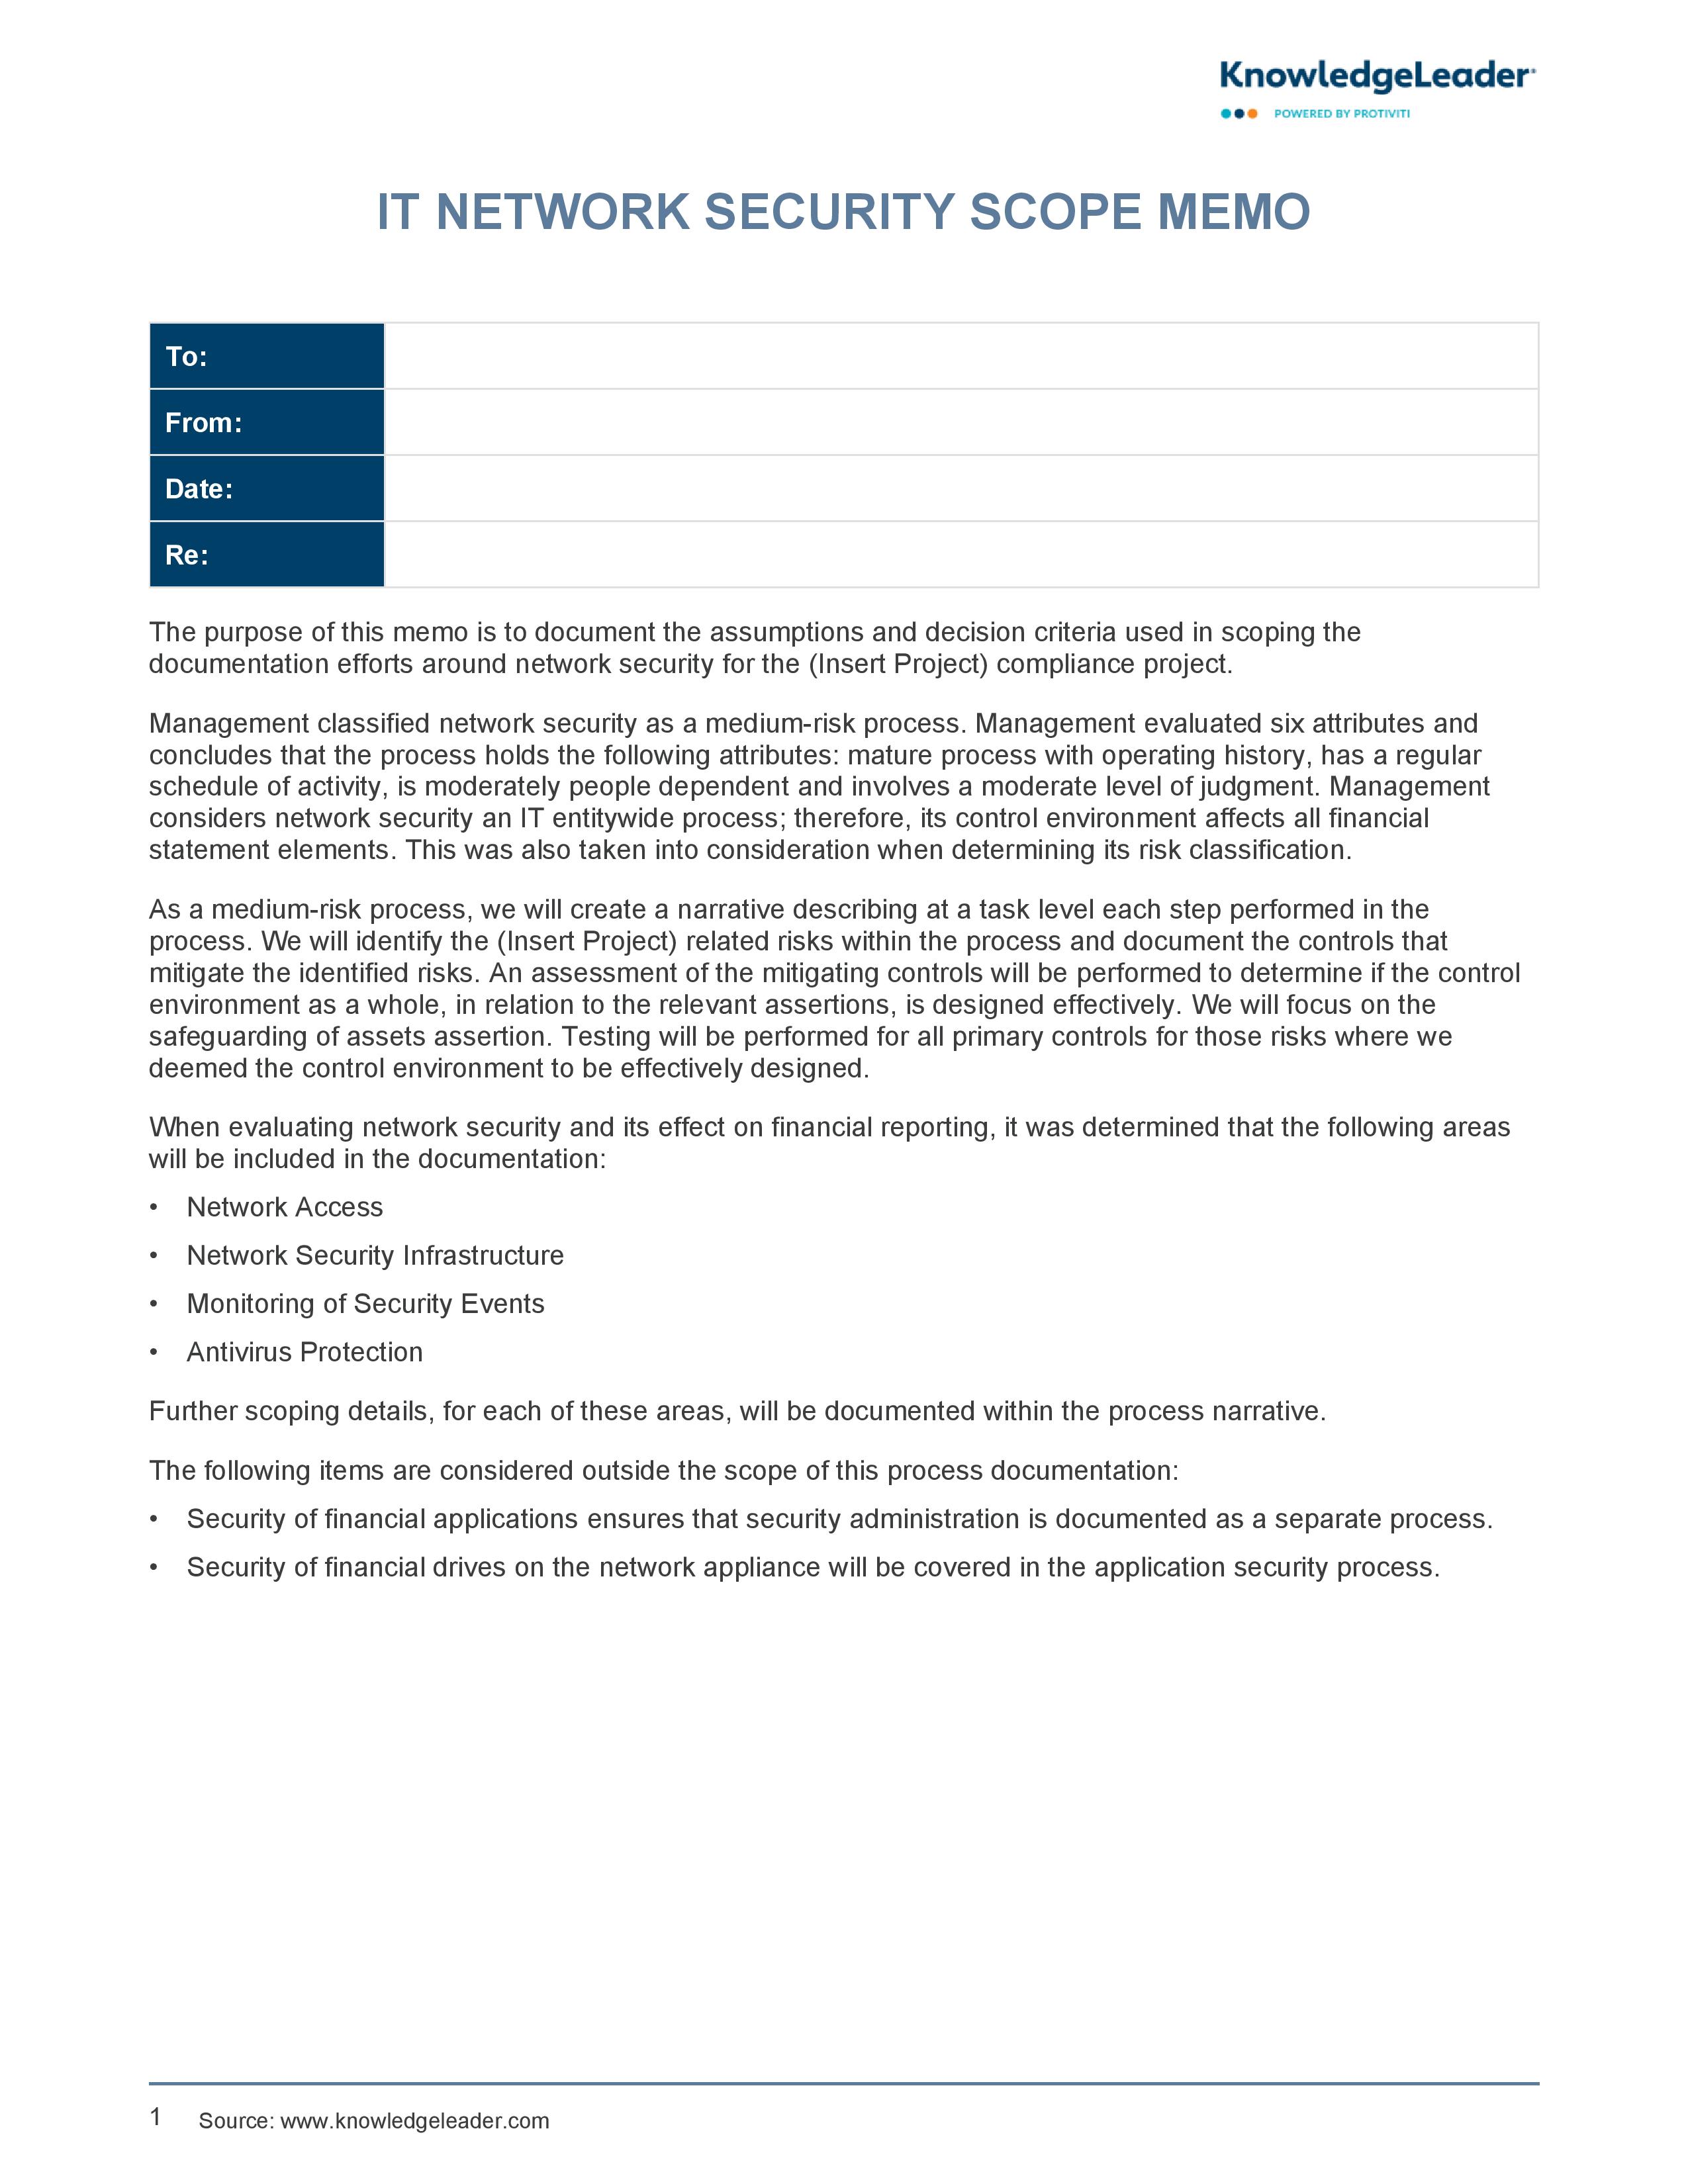 screenshot of the first page of IT Network Security Scope Memo